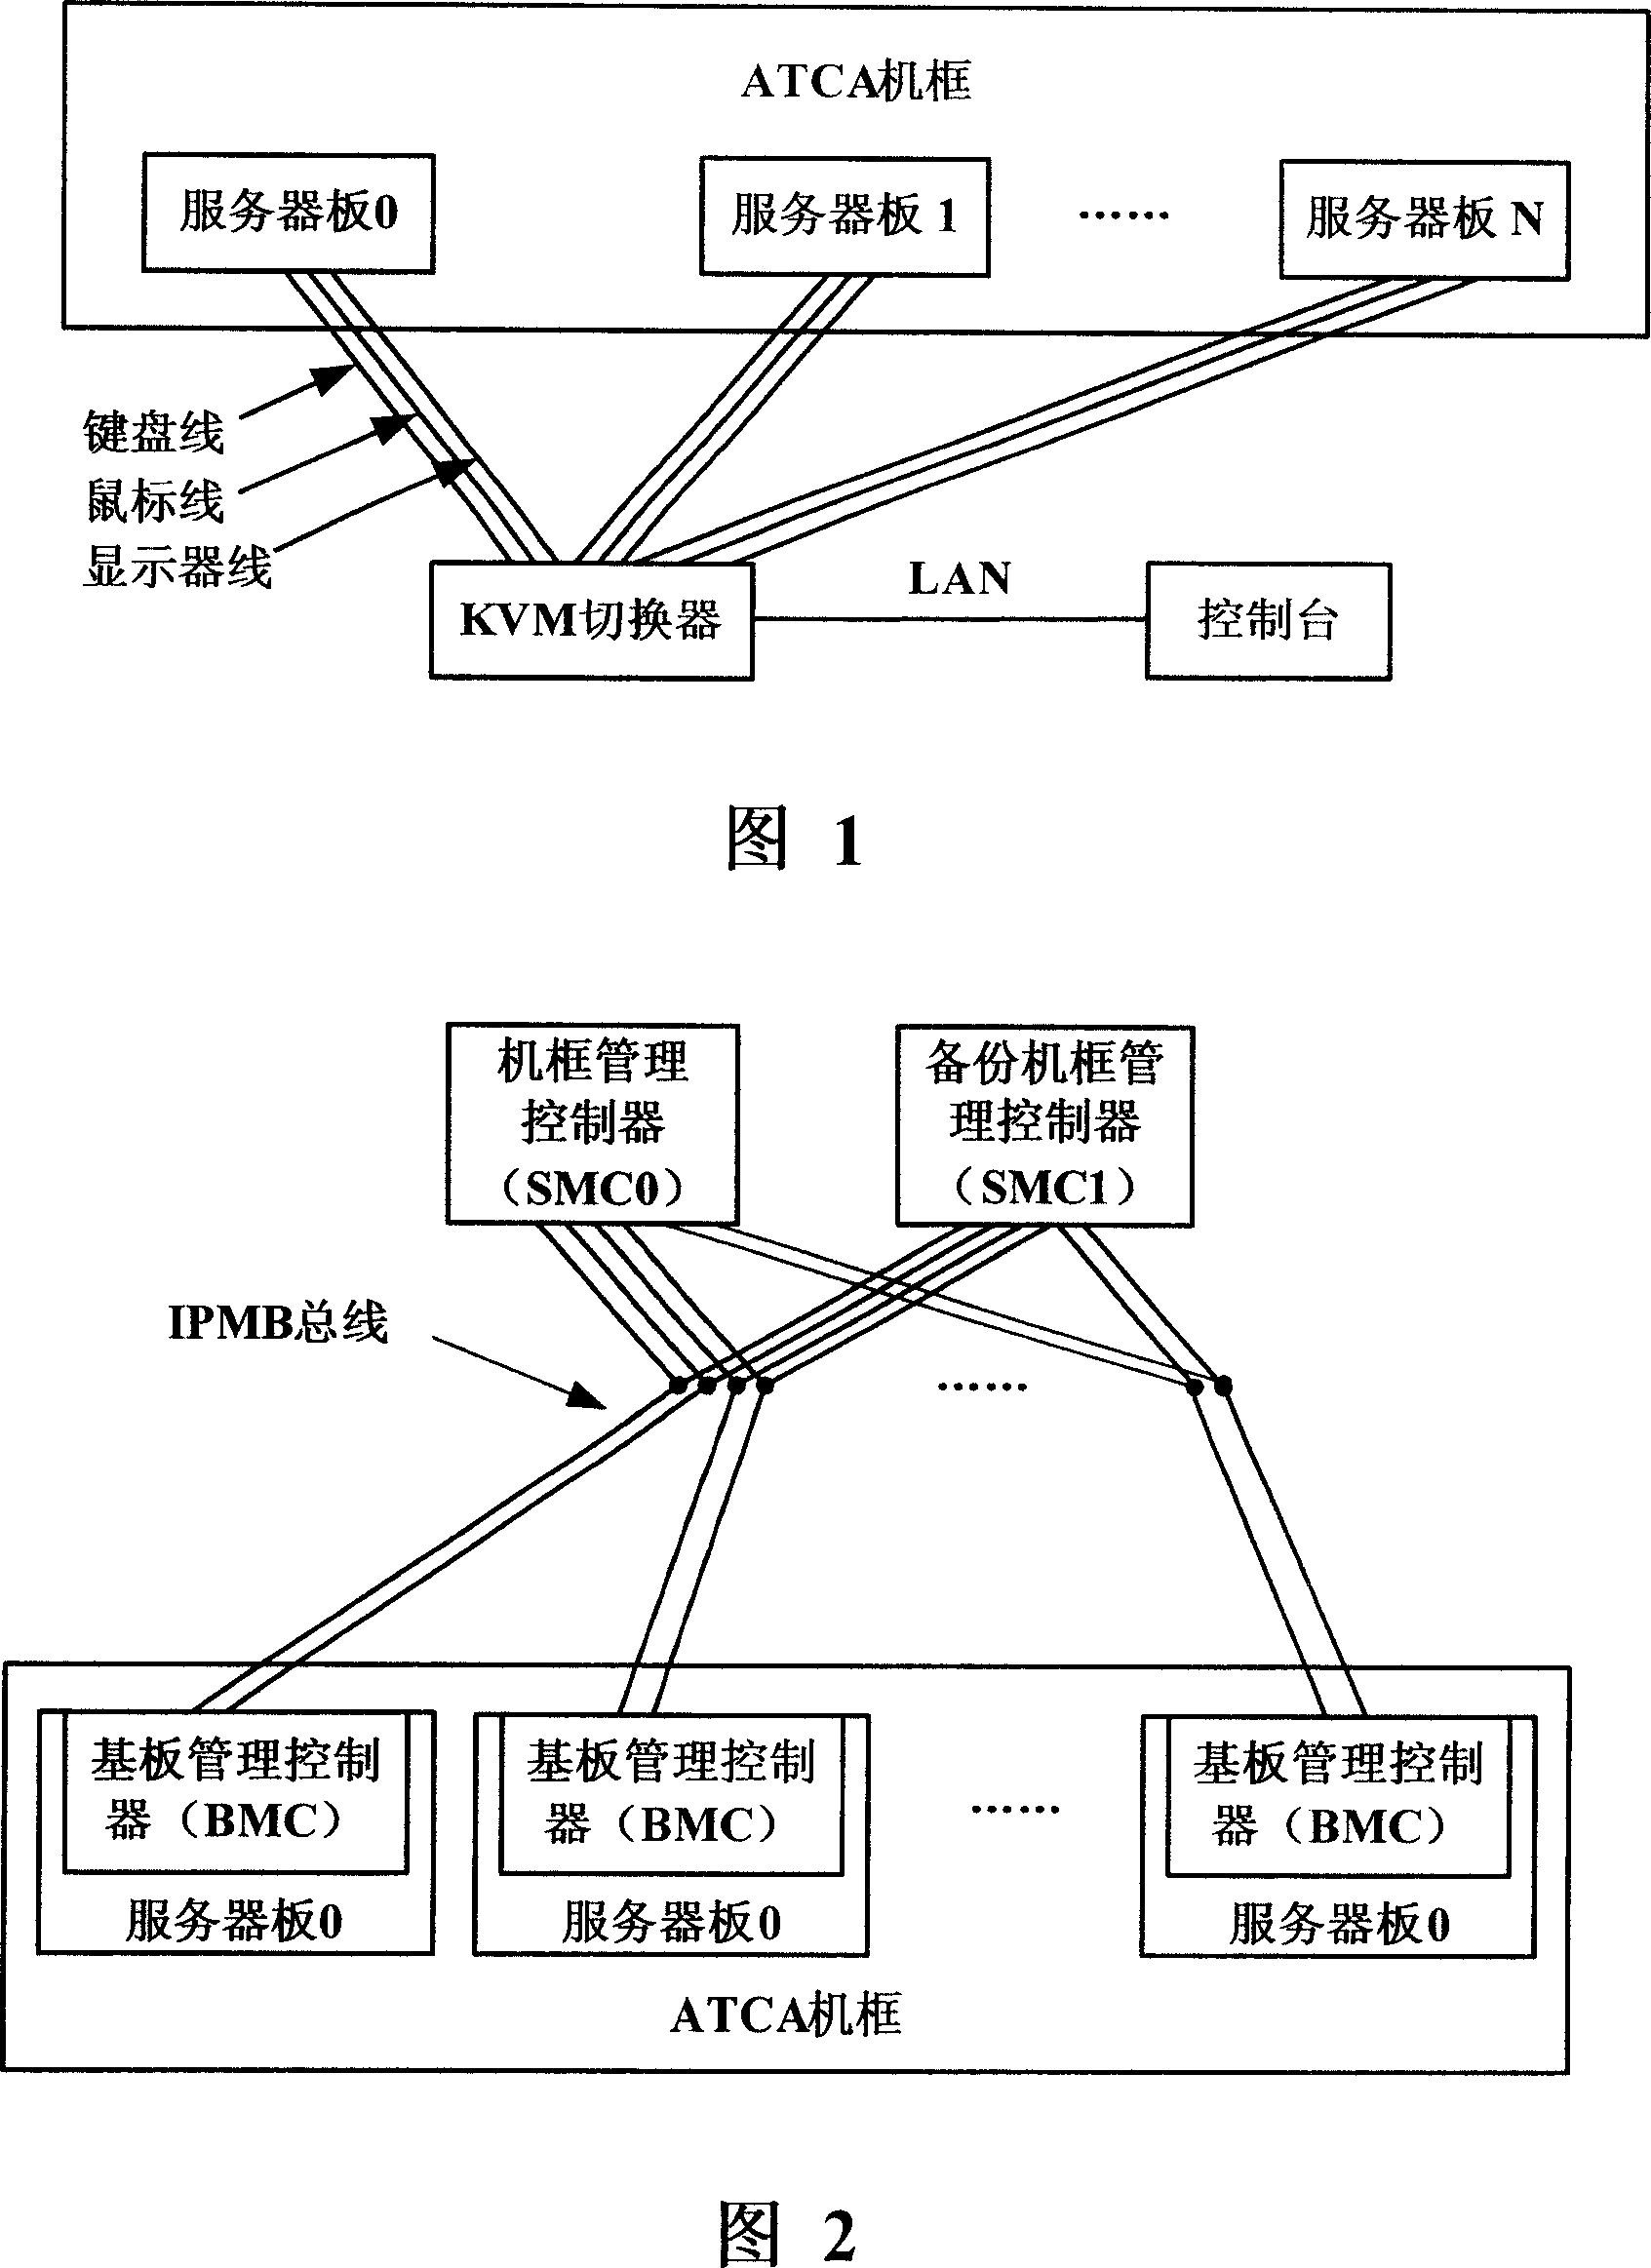 System for managing high-level telecommunication computing construction frame and server long-distance control